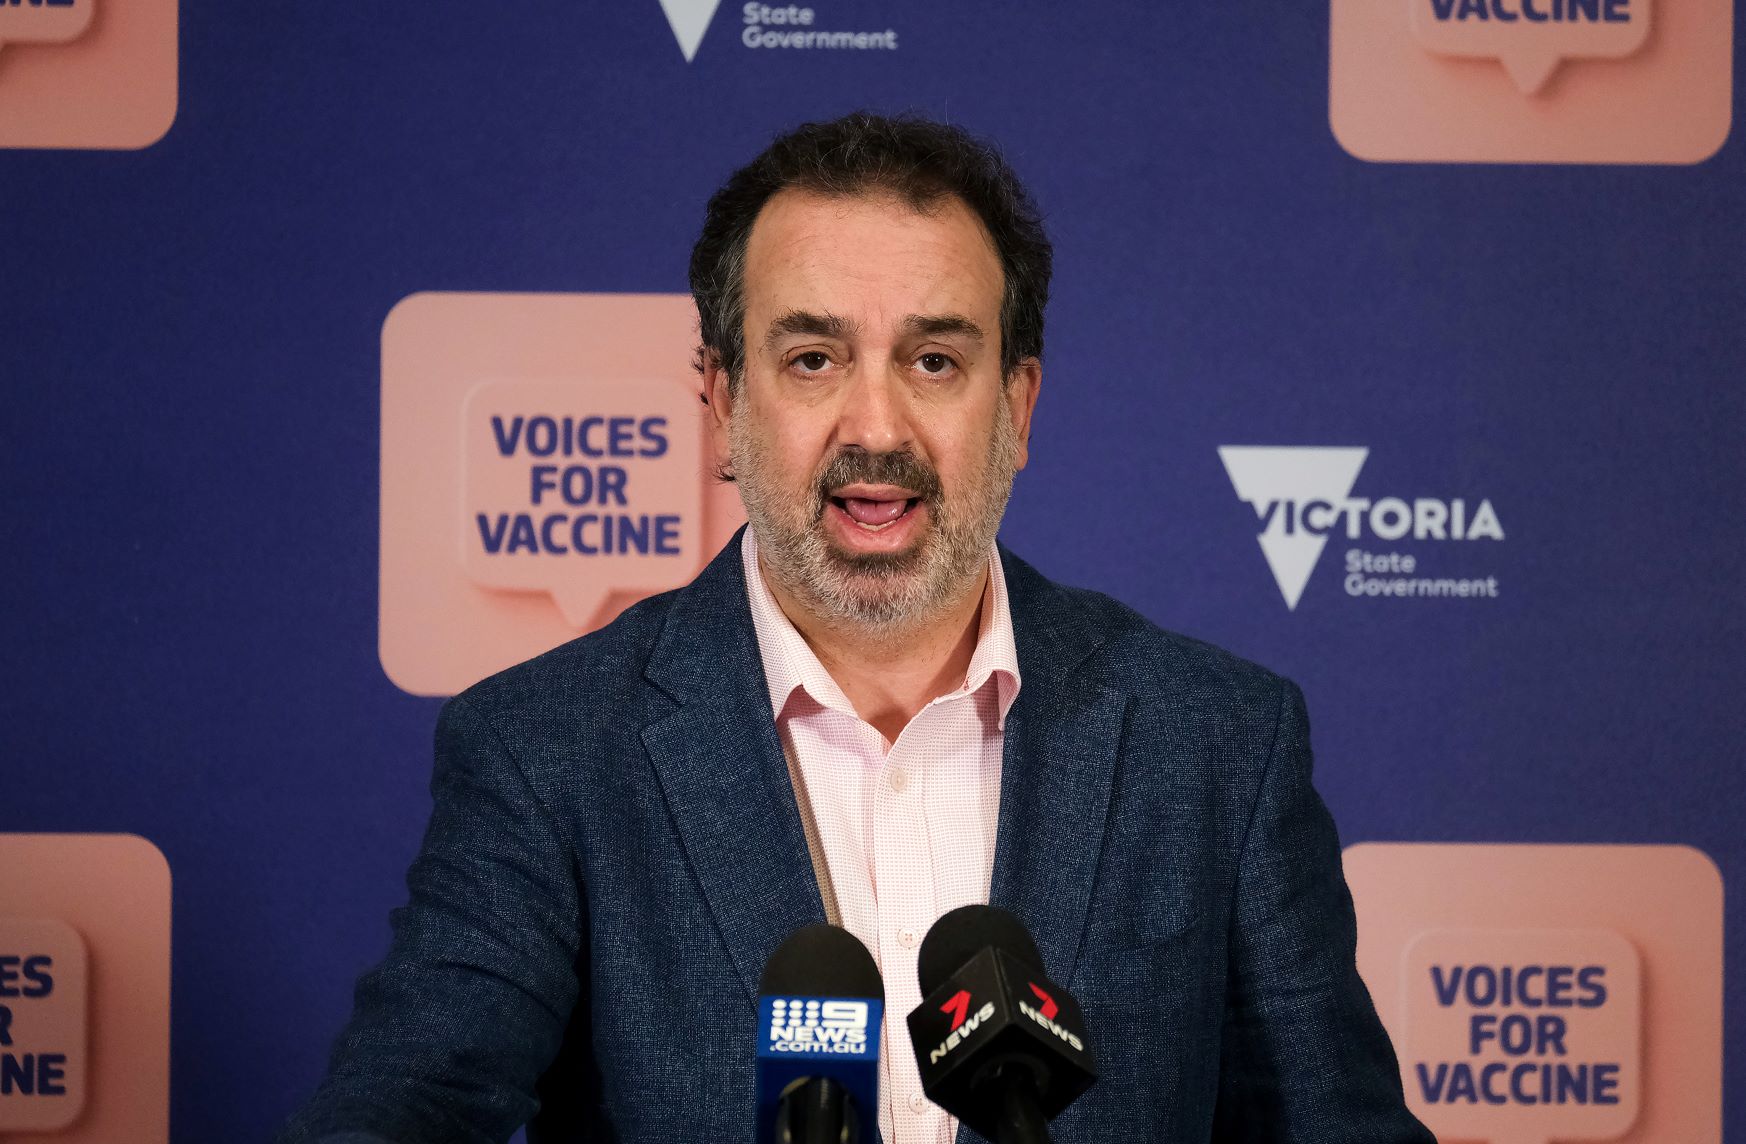 Victorian Minister for Industry Support and Recovery Martin Pakula speaks to the media